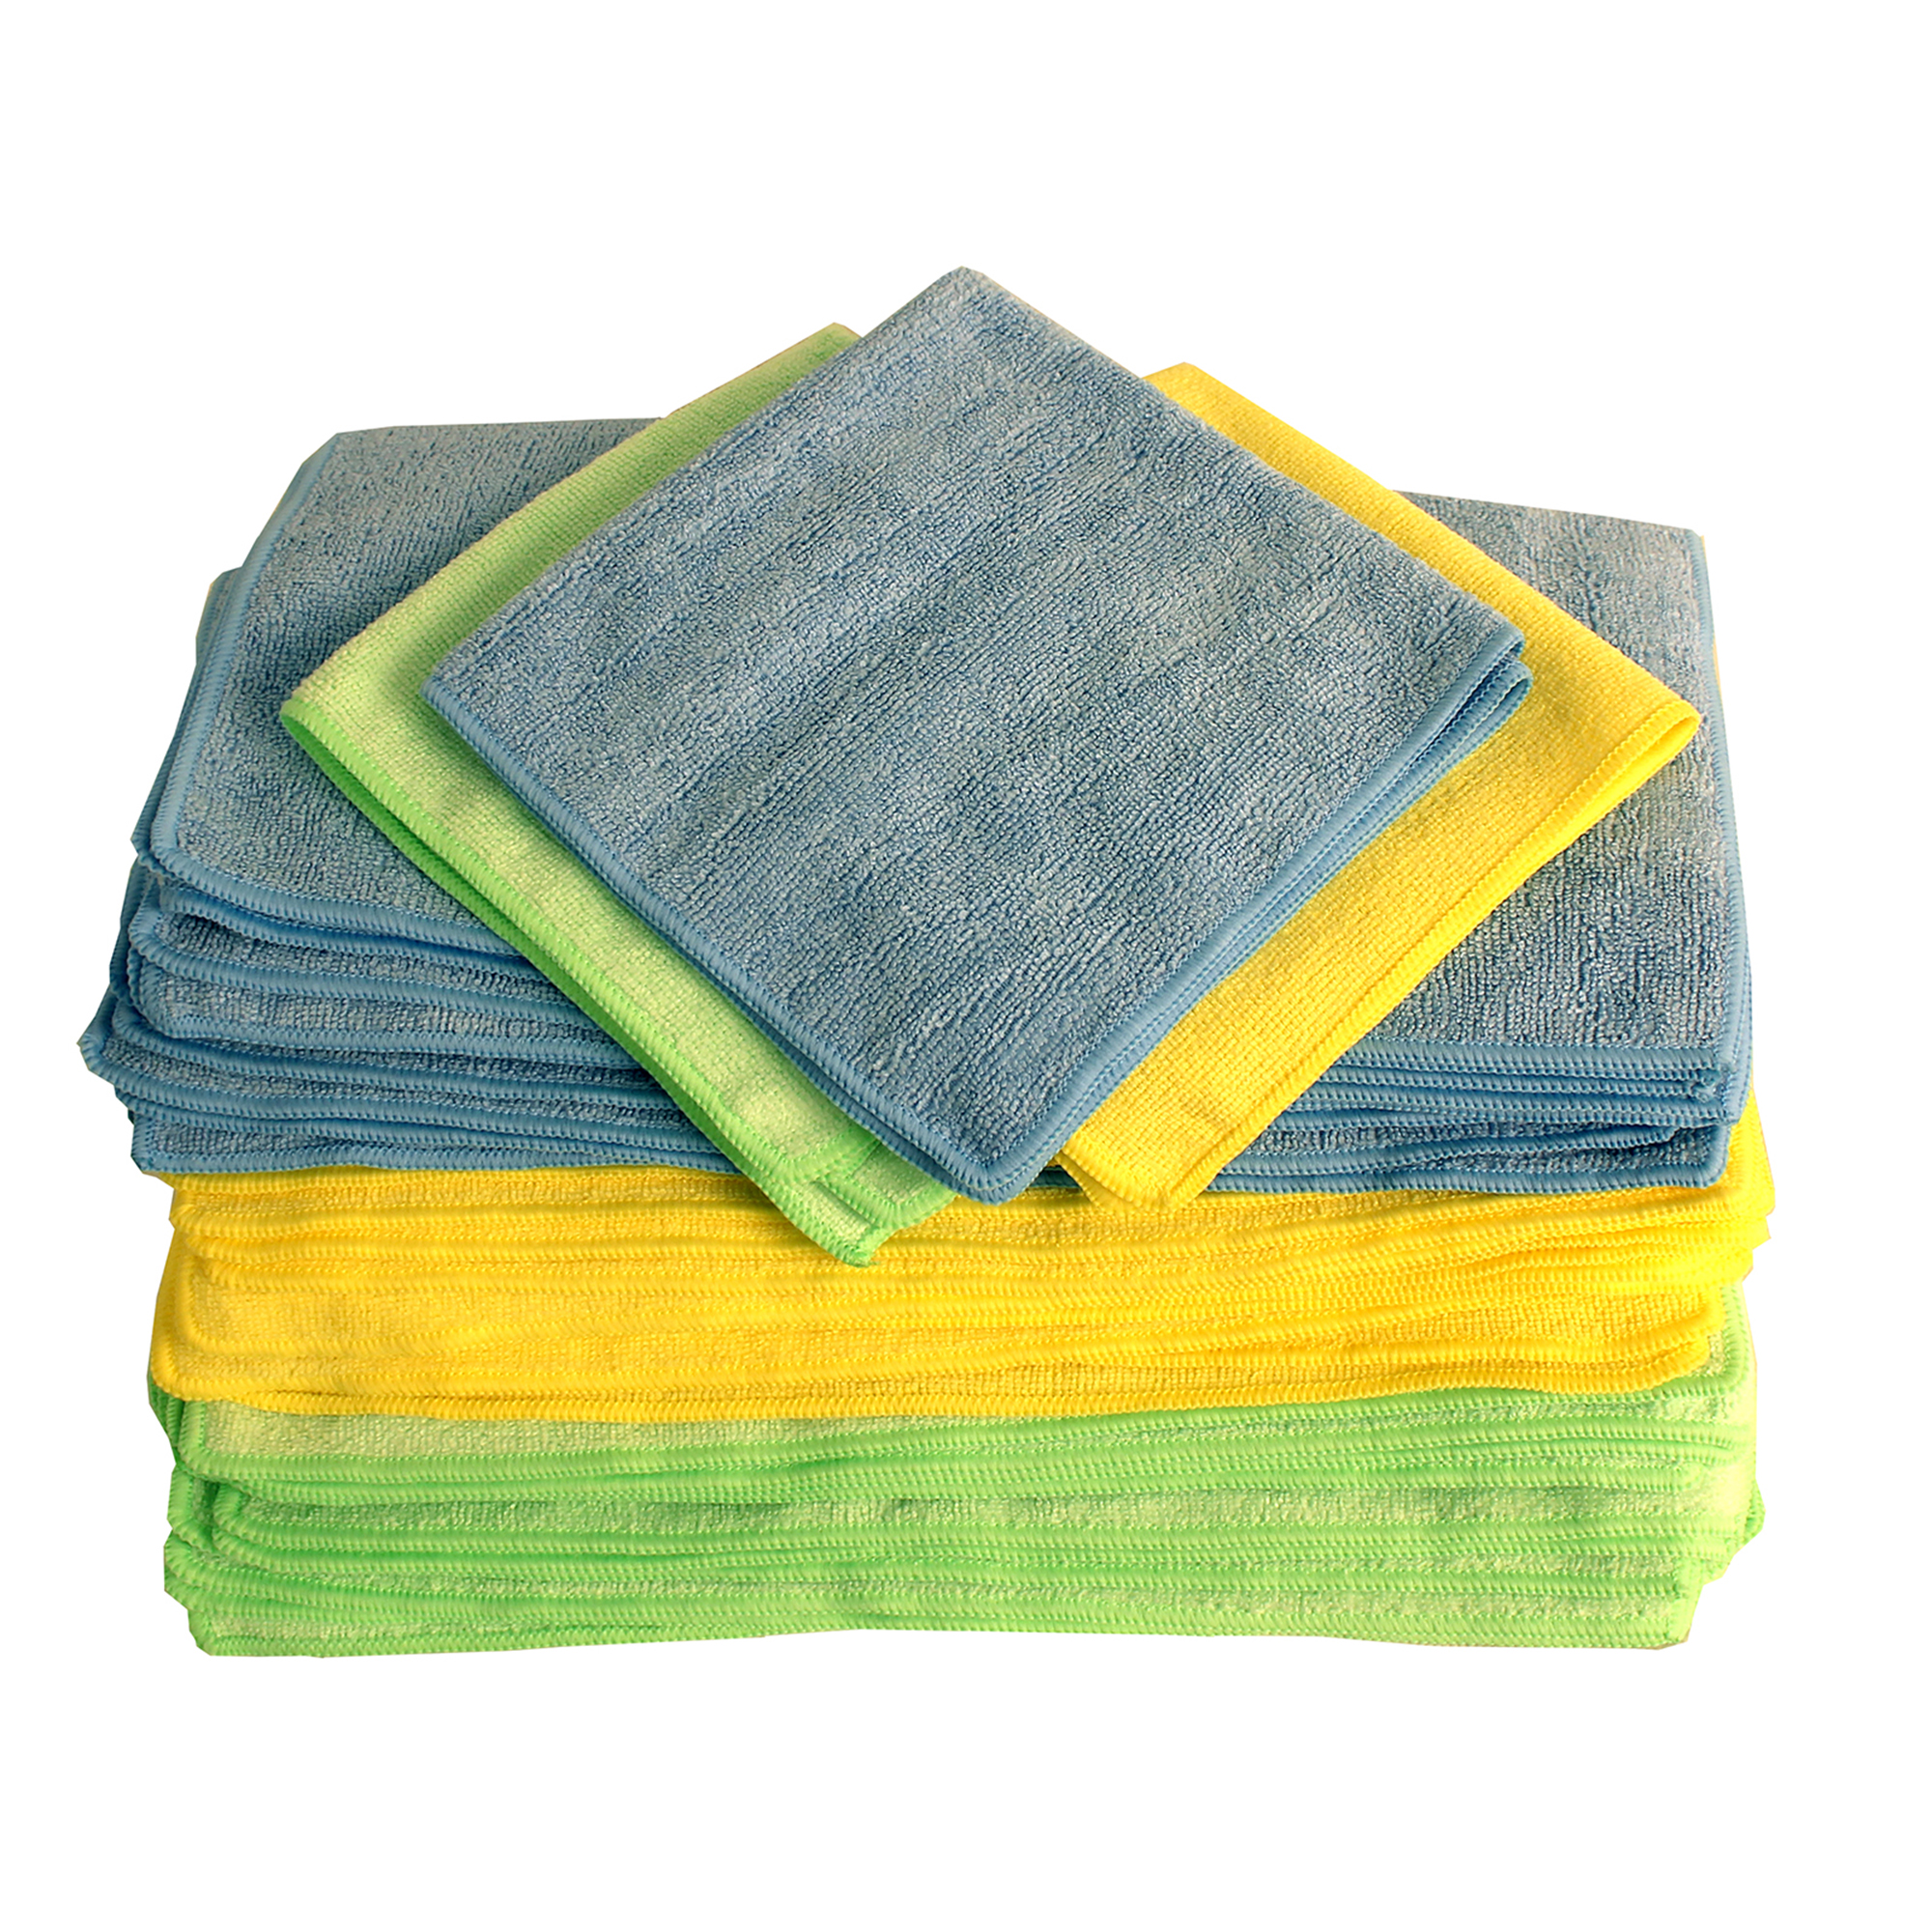 Microfiber Cleaning Cloths, 30 Piece per Pack